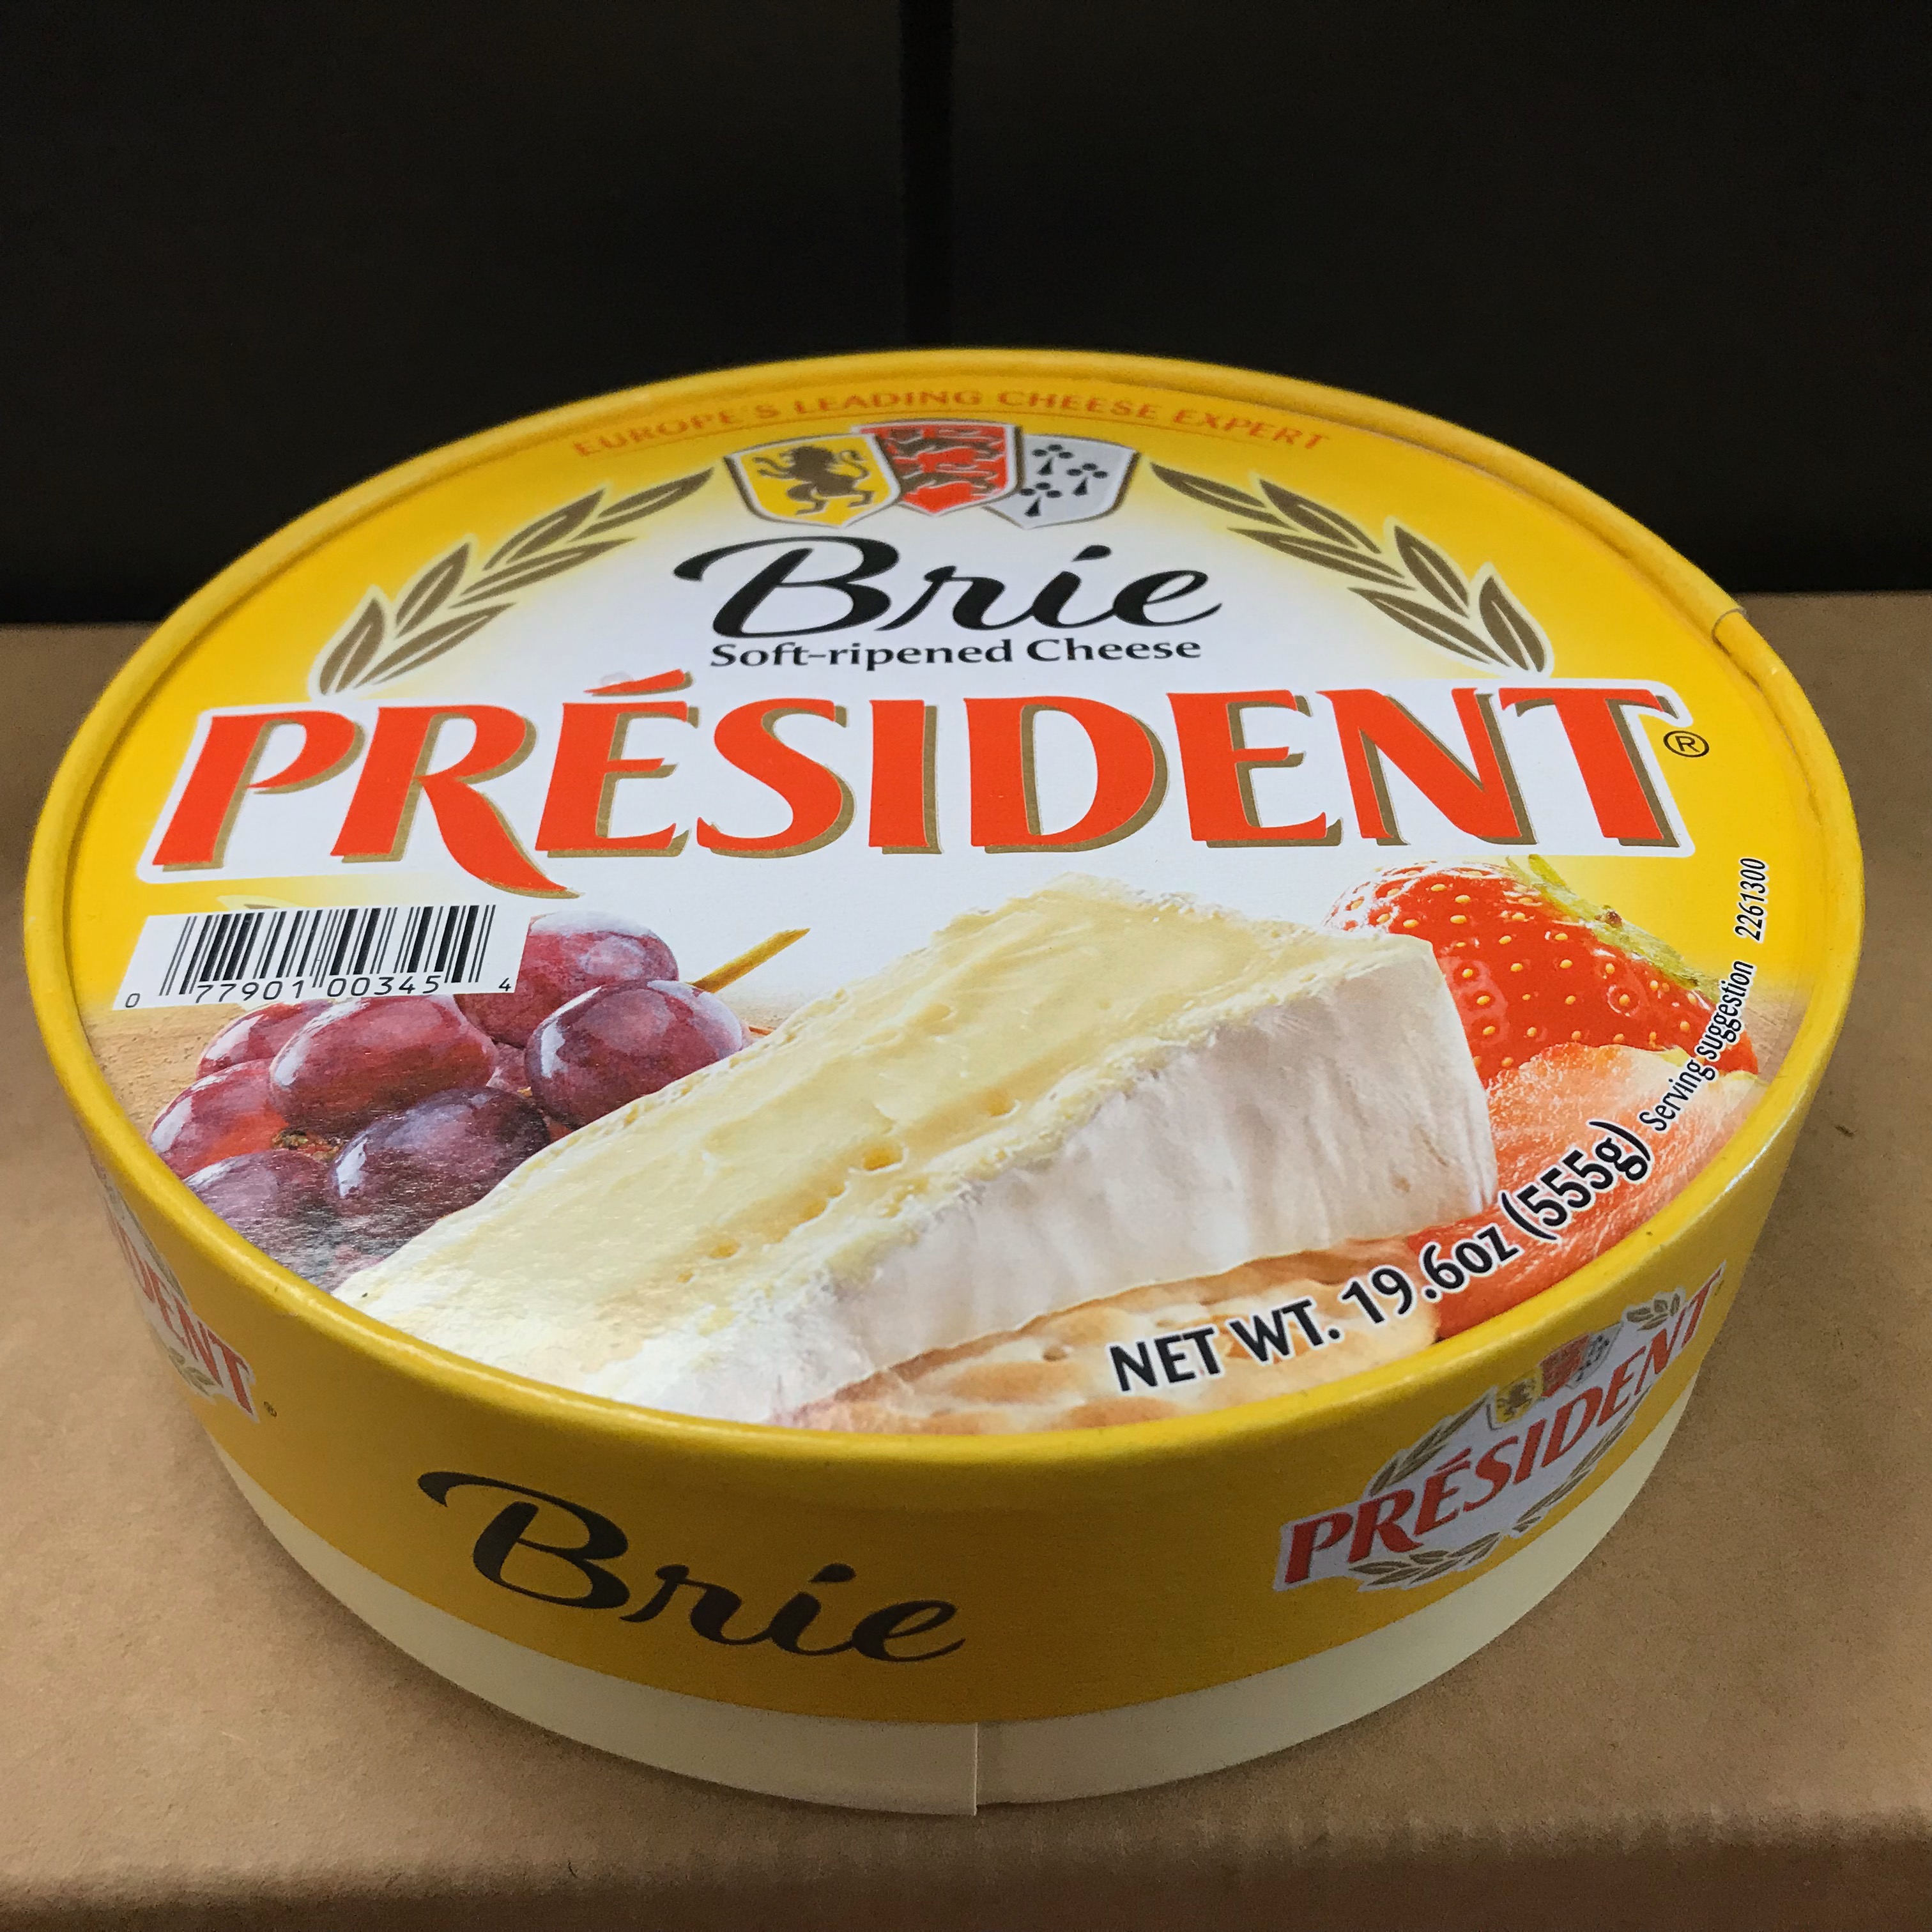 President soft-ripened Brie cheese 19.6 oz